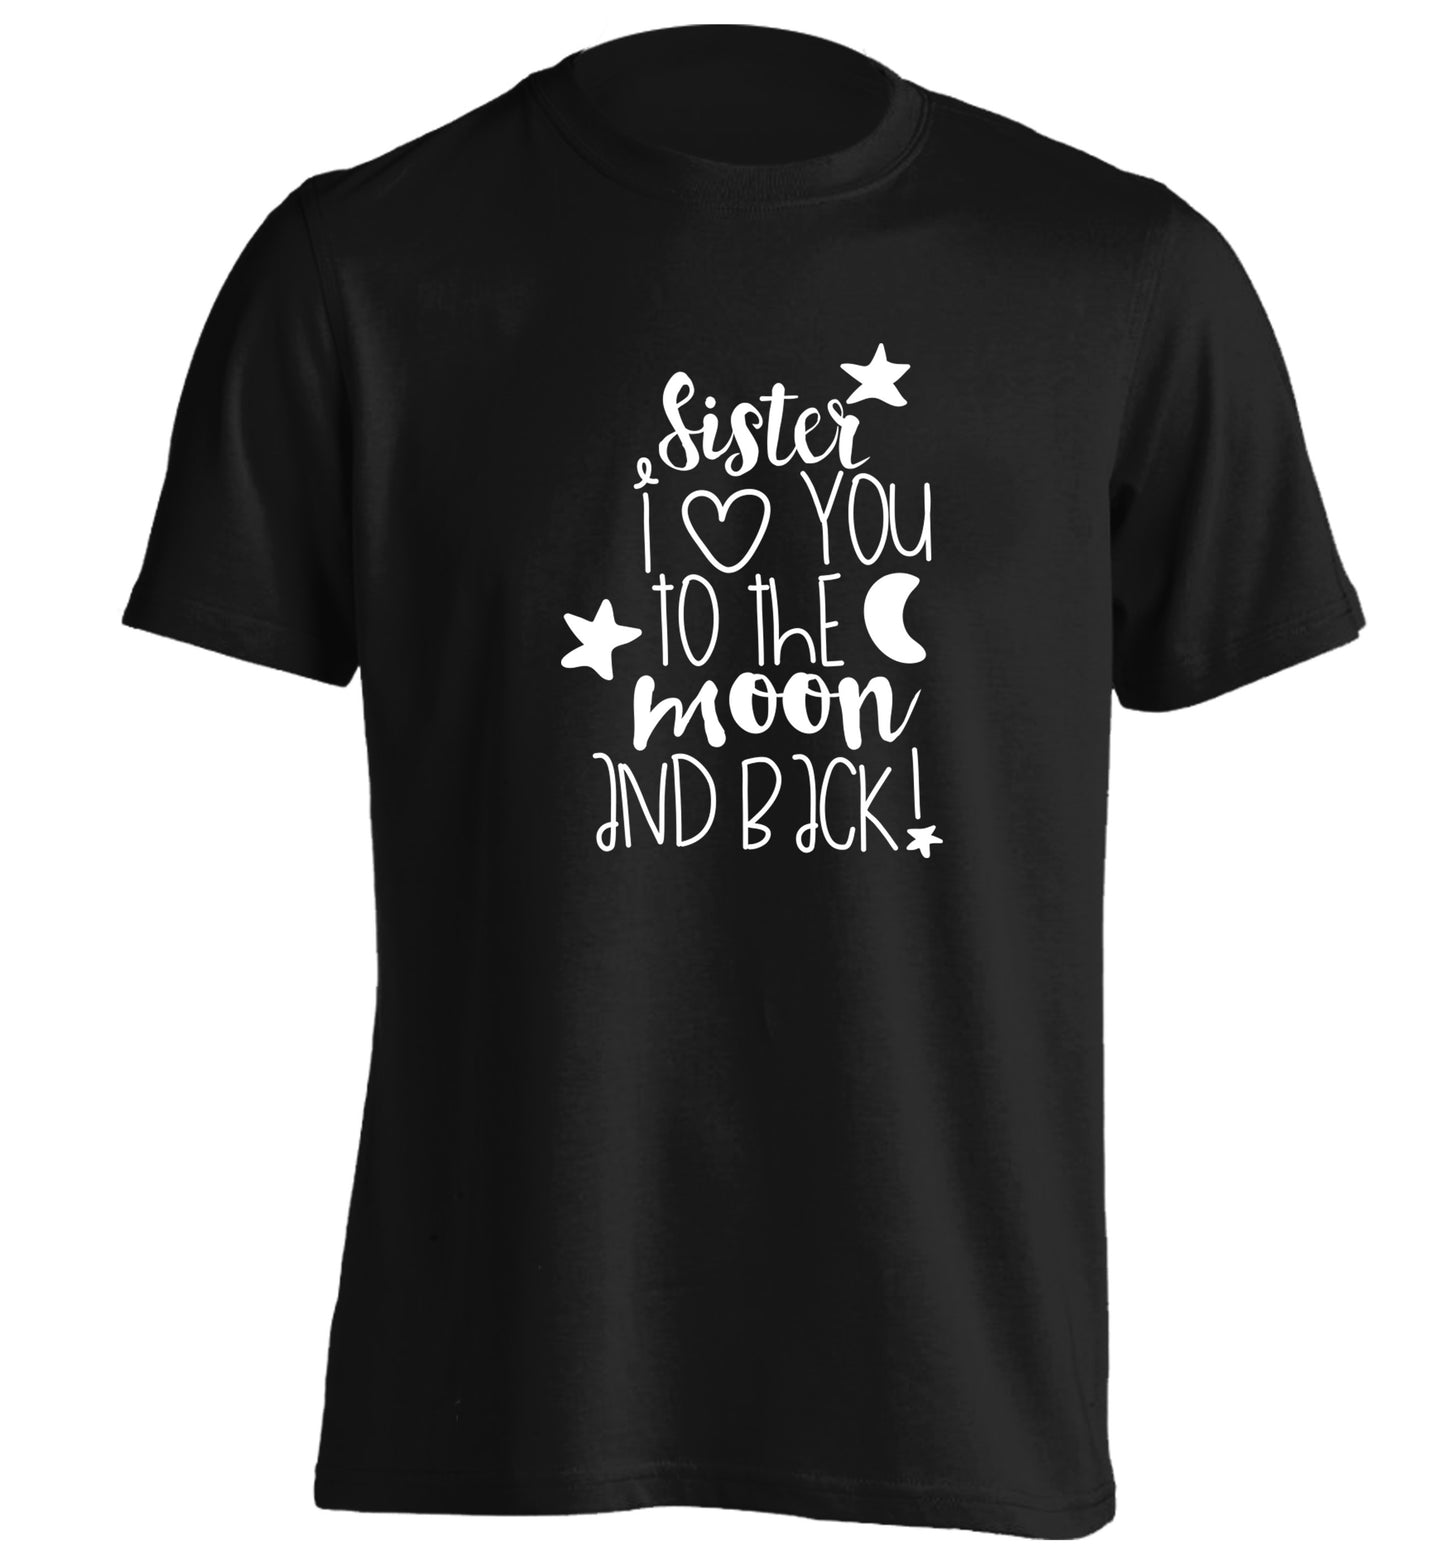 Sister I love you to the moon and back adults unisex black Tshirt 2XL